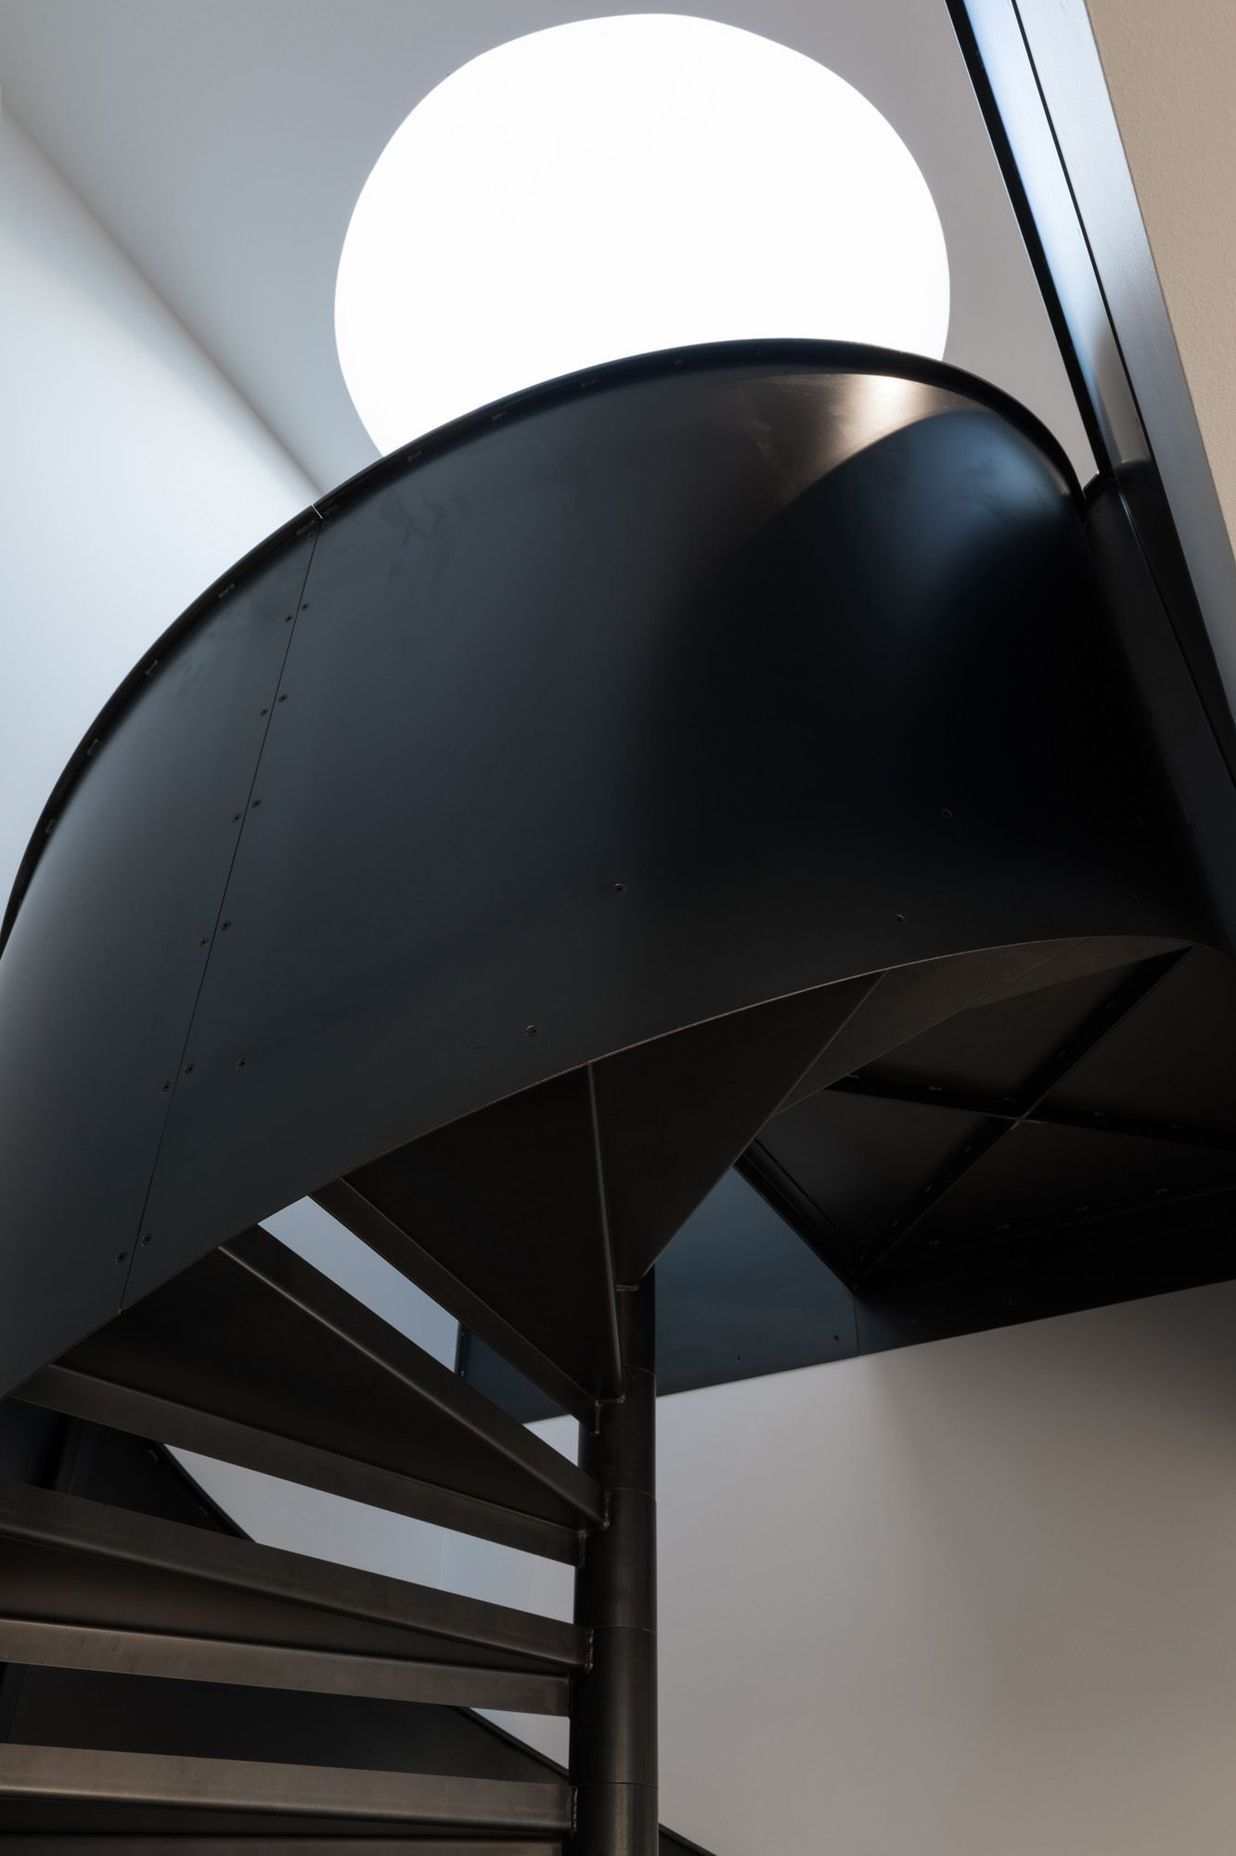 A black spiral staircase made in steel plate is a key architectural feature.